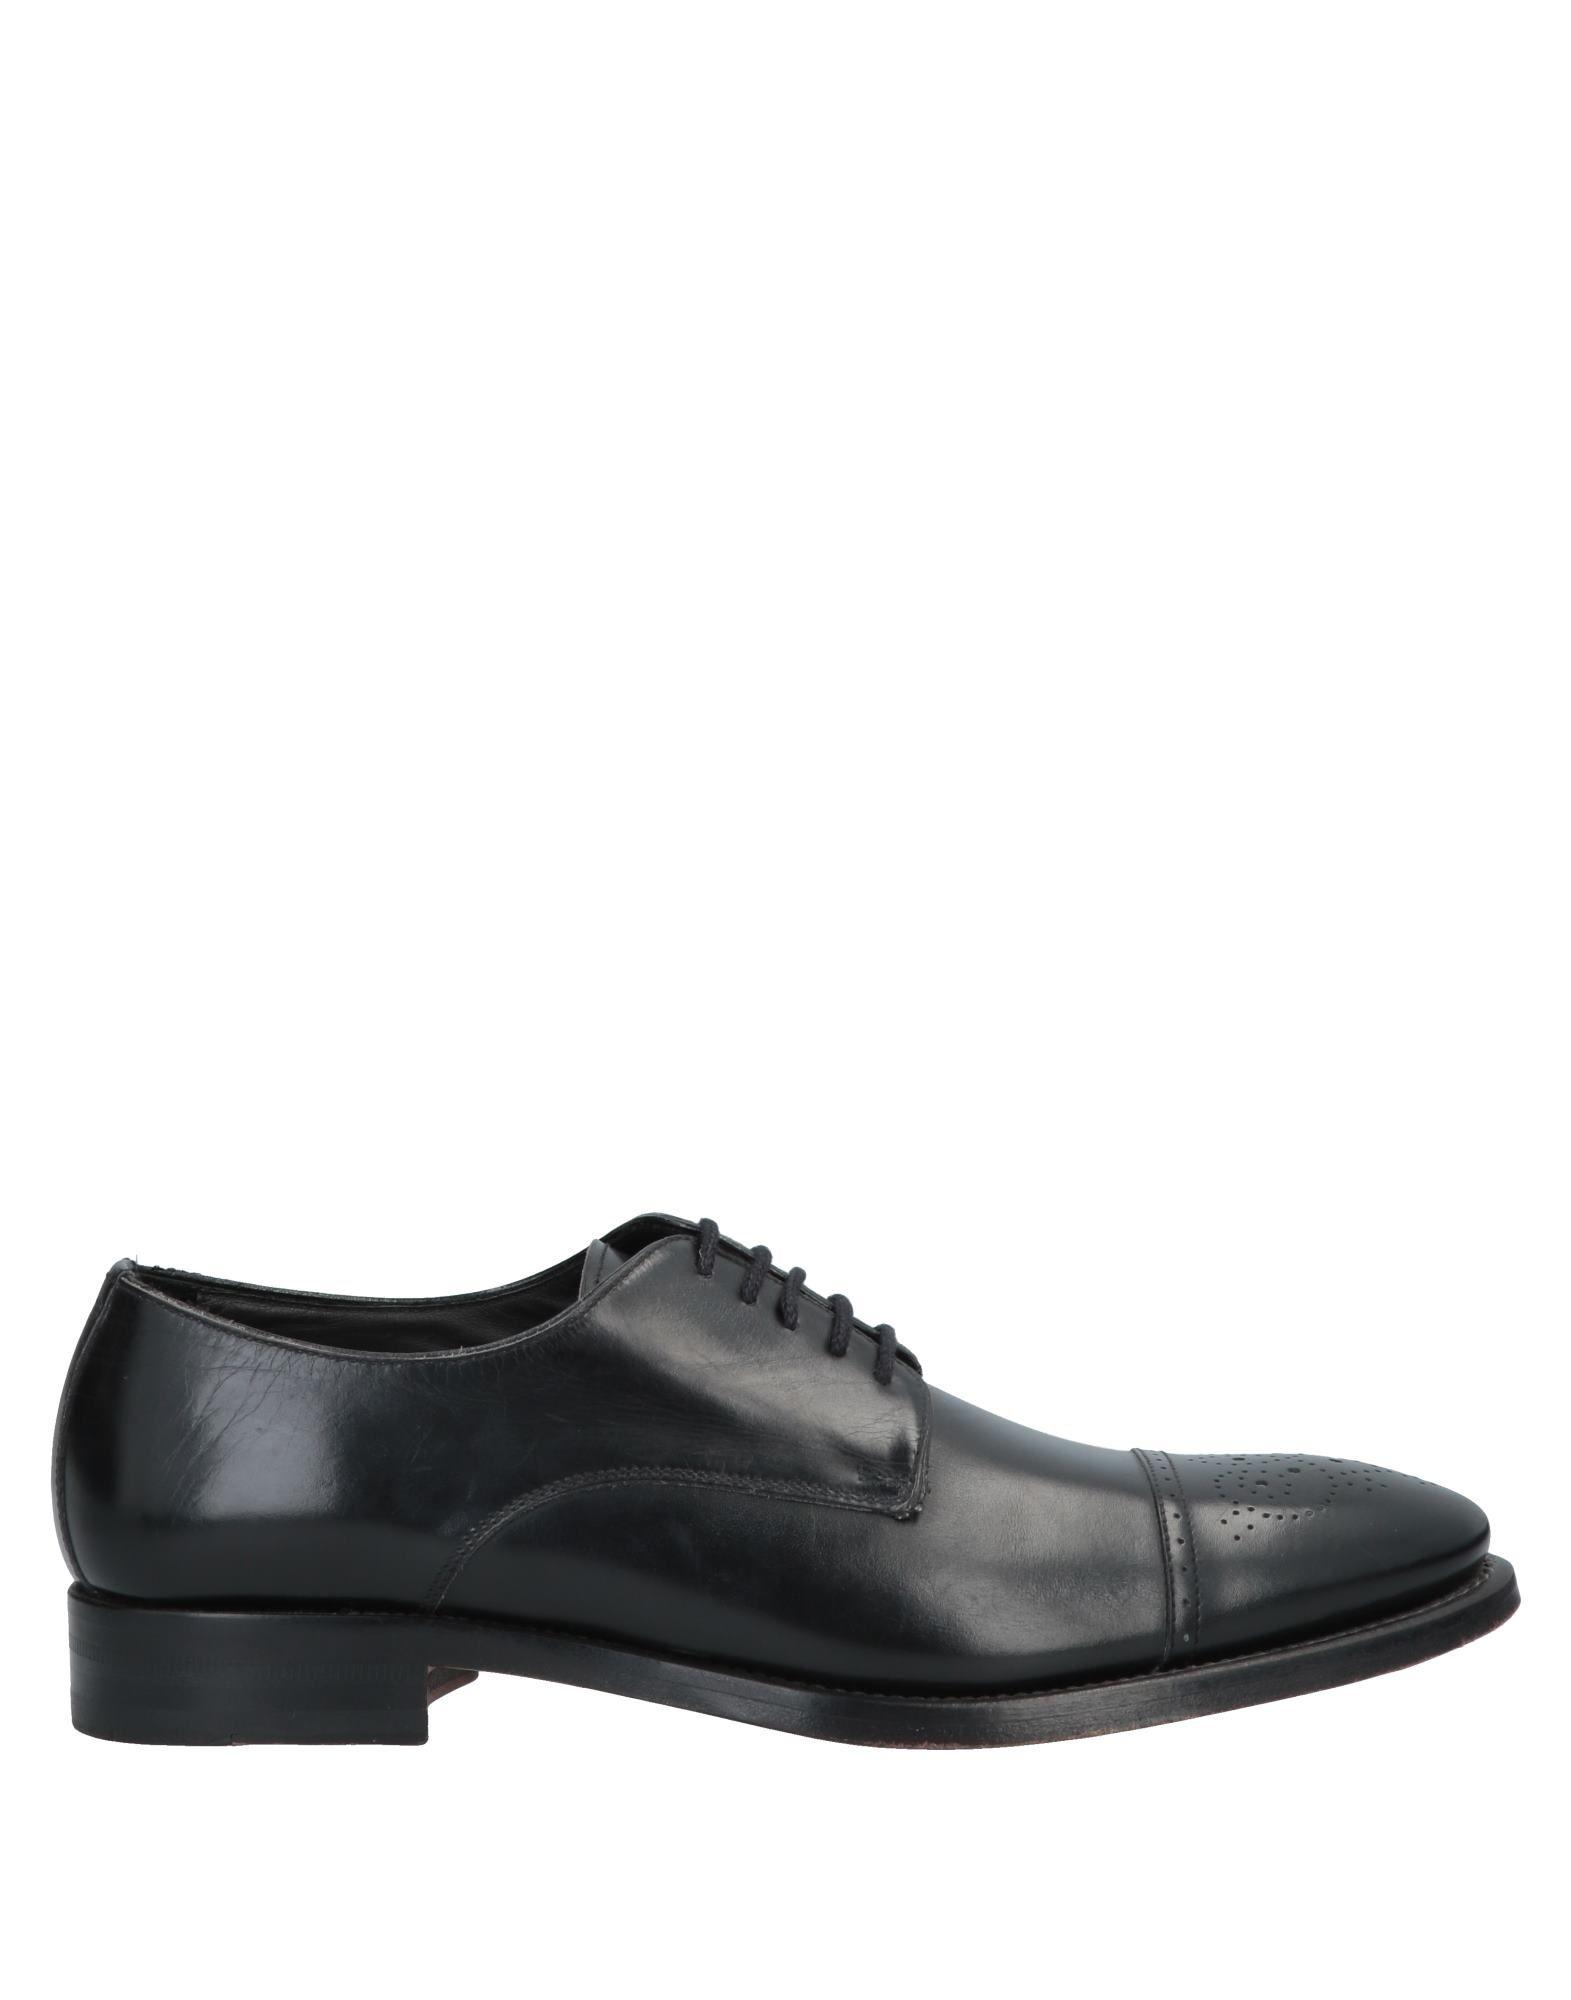 Bruno Magli Lace-up Shoe in Black for Men - Lyst